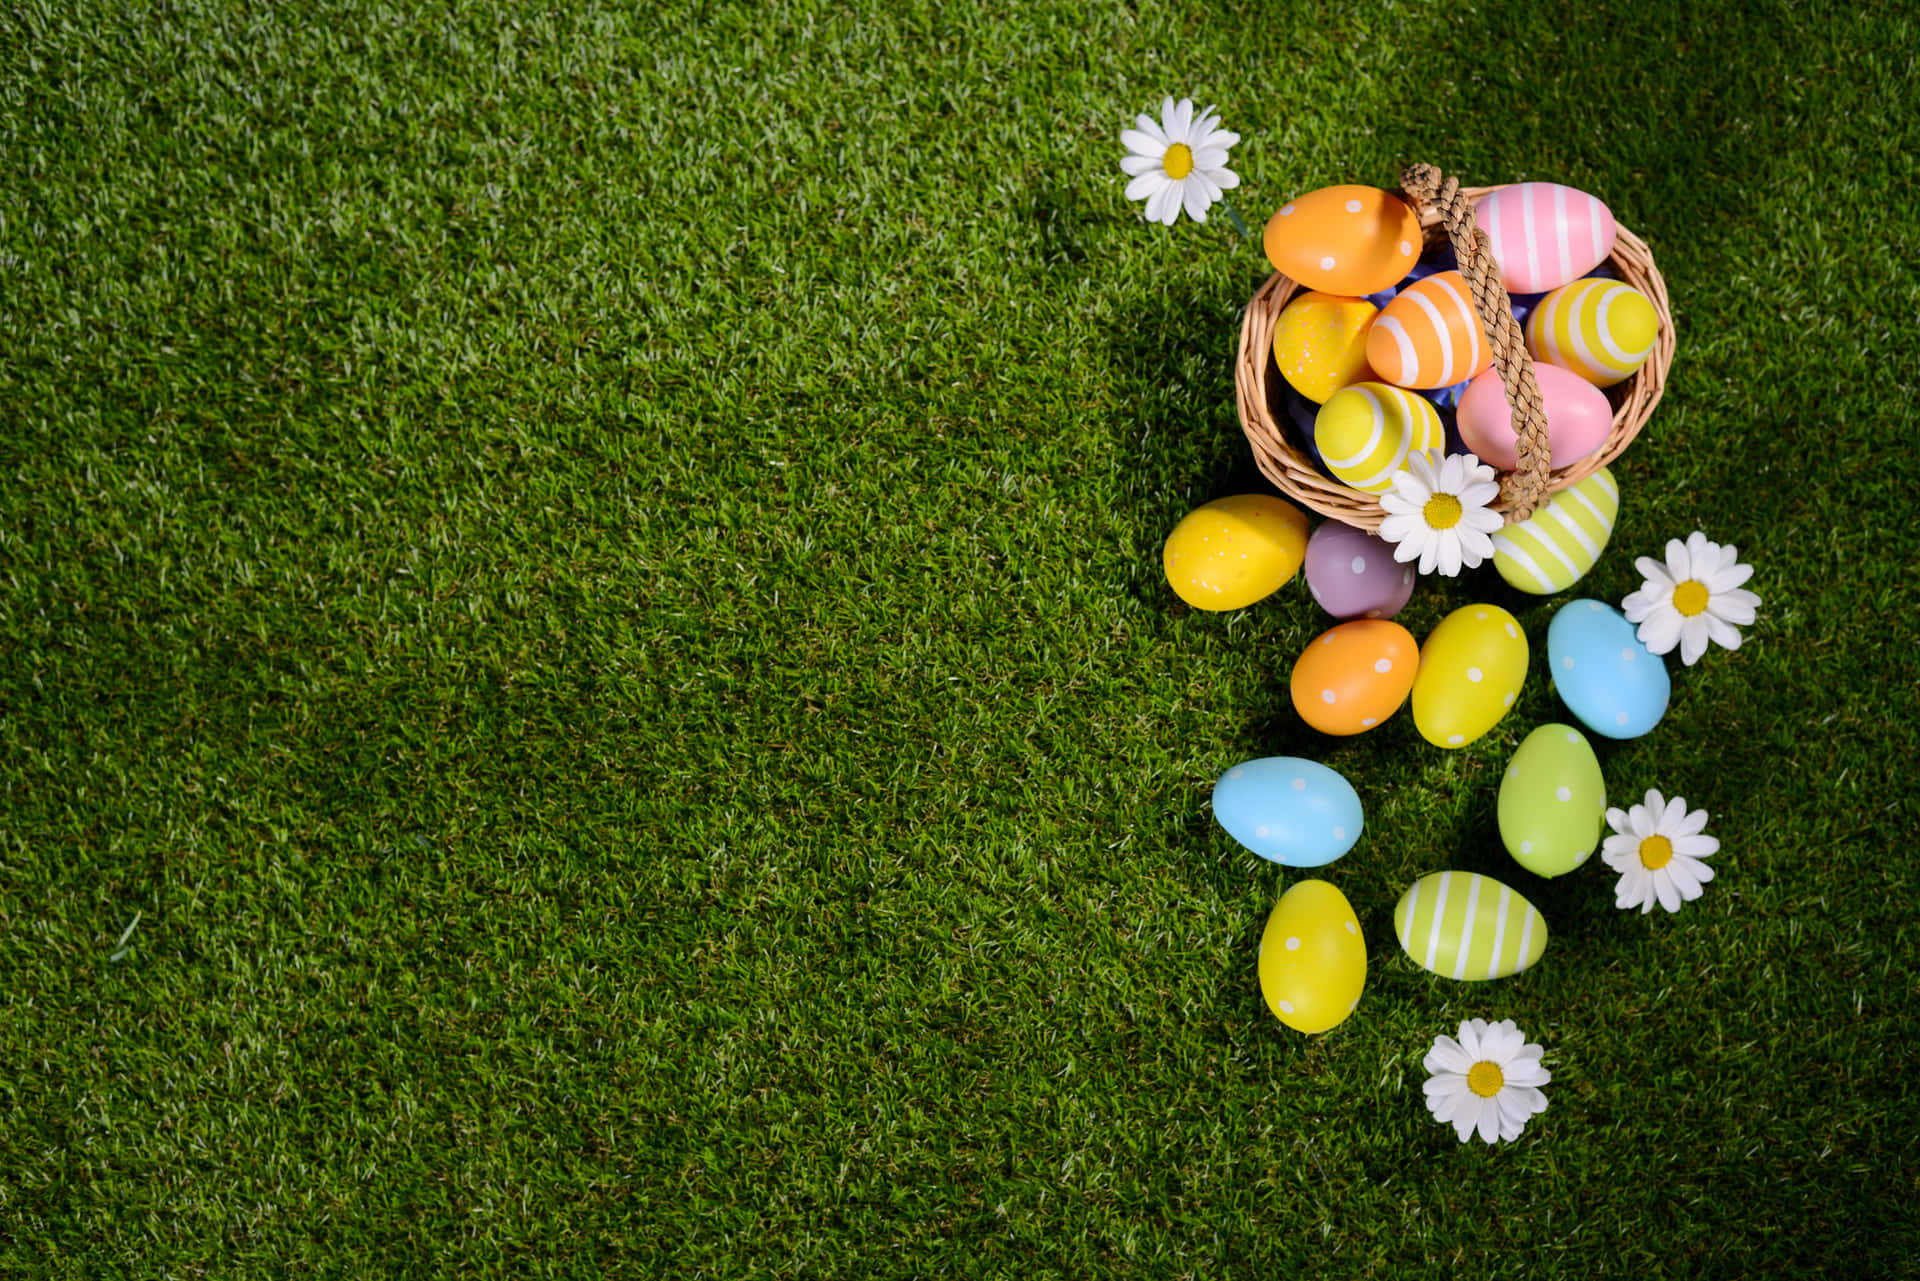 Easter is more than just an egg hunt, make it an adventure with Easter Zoom!